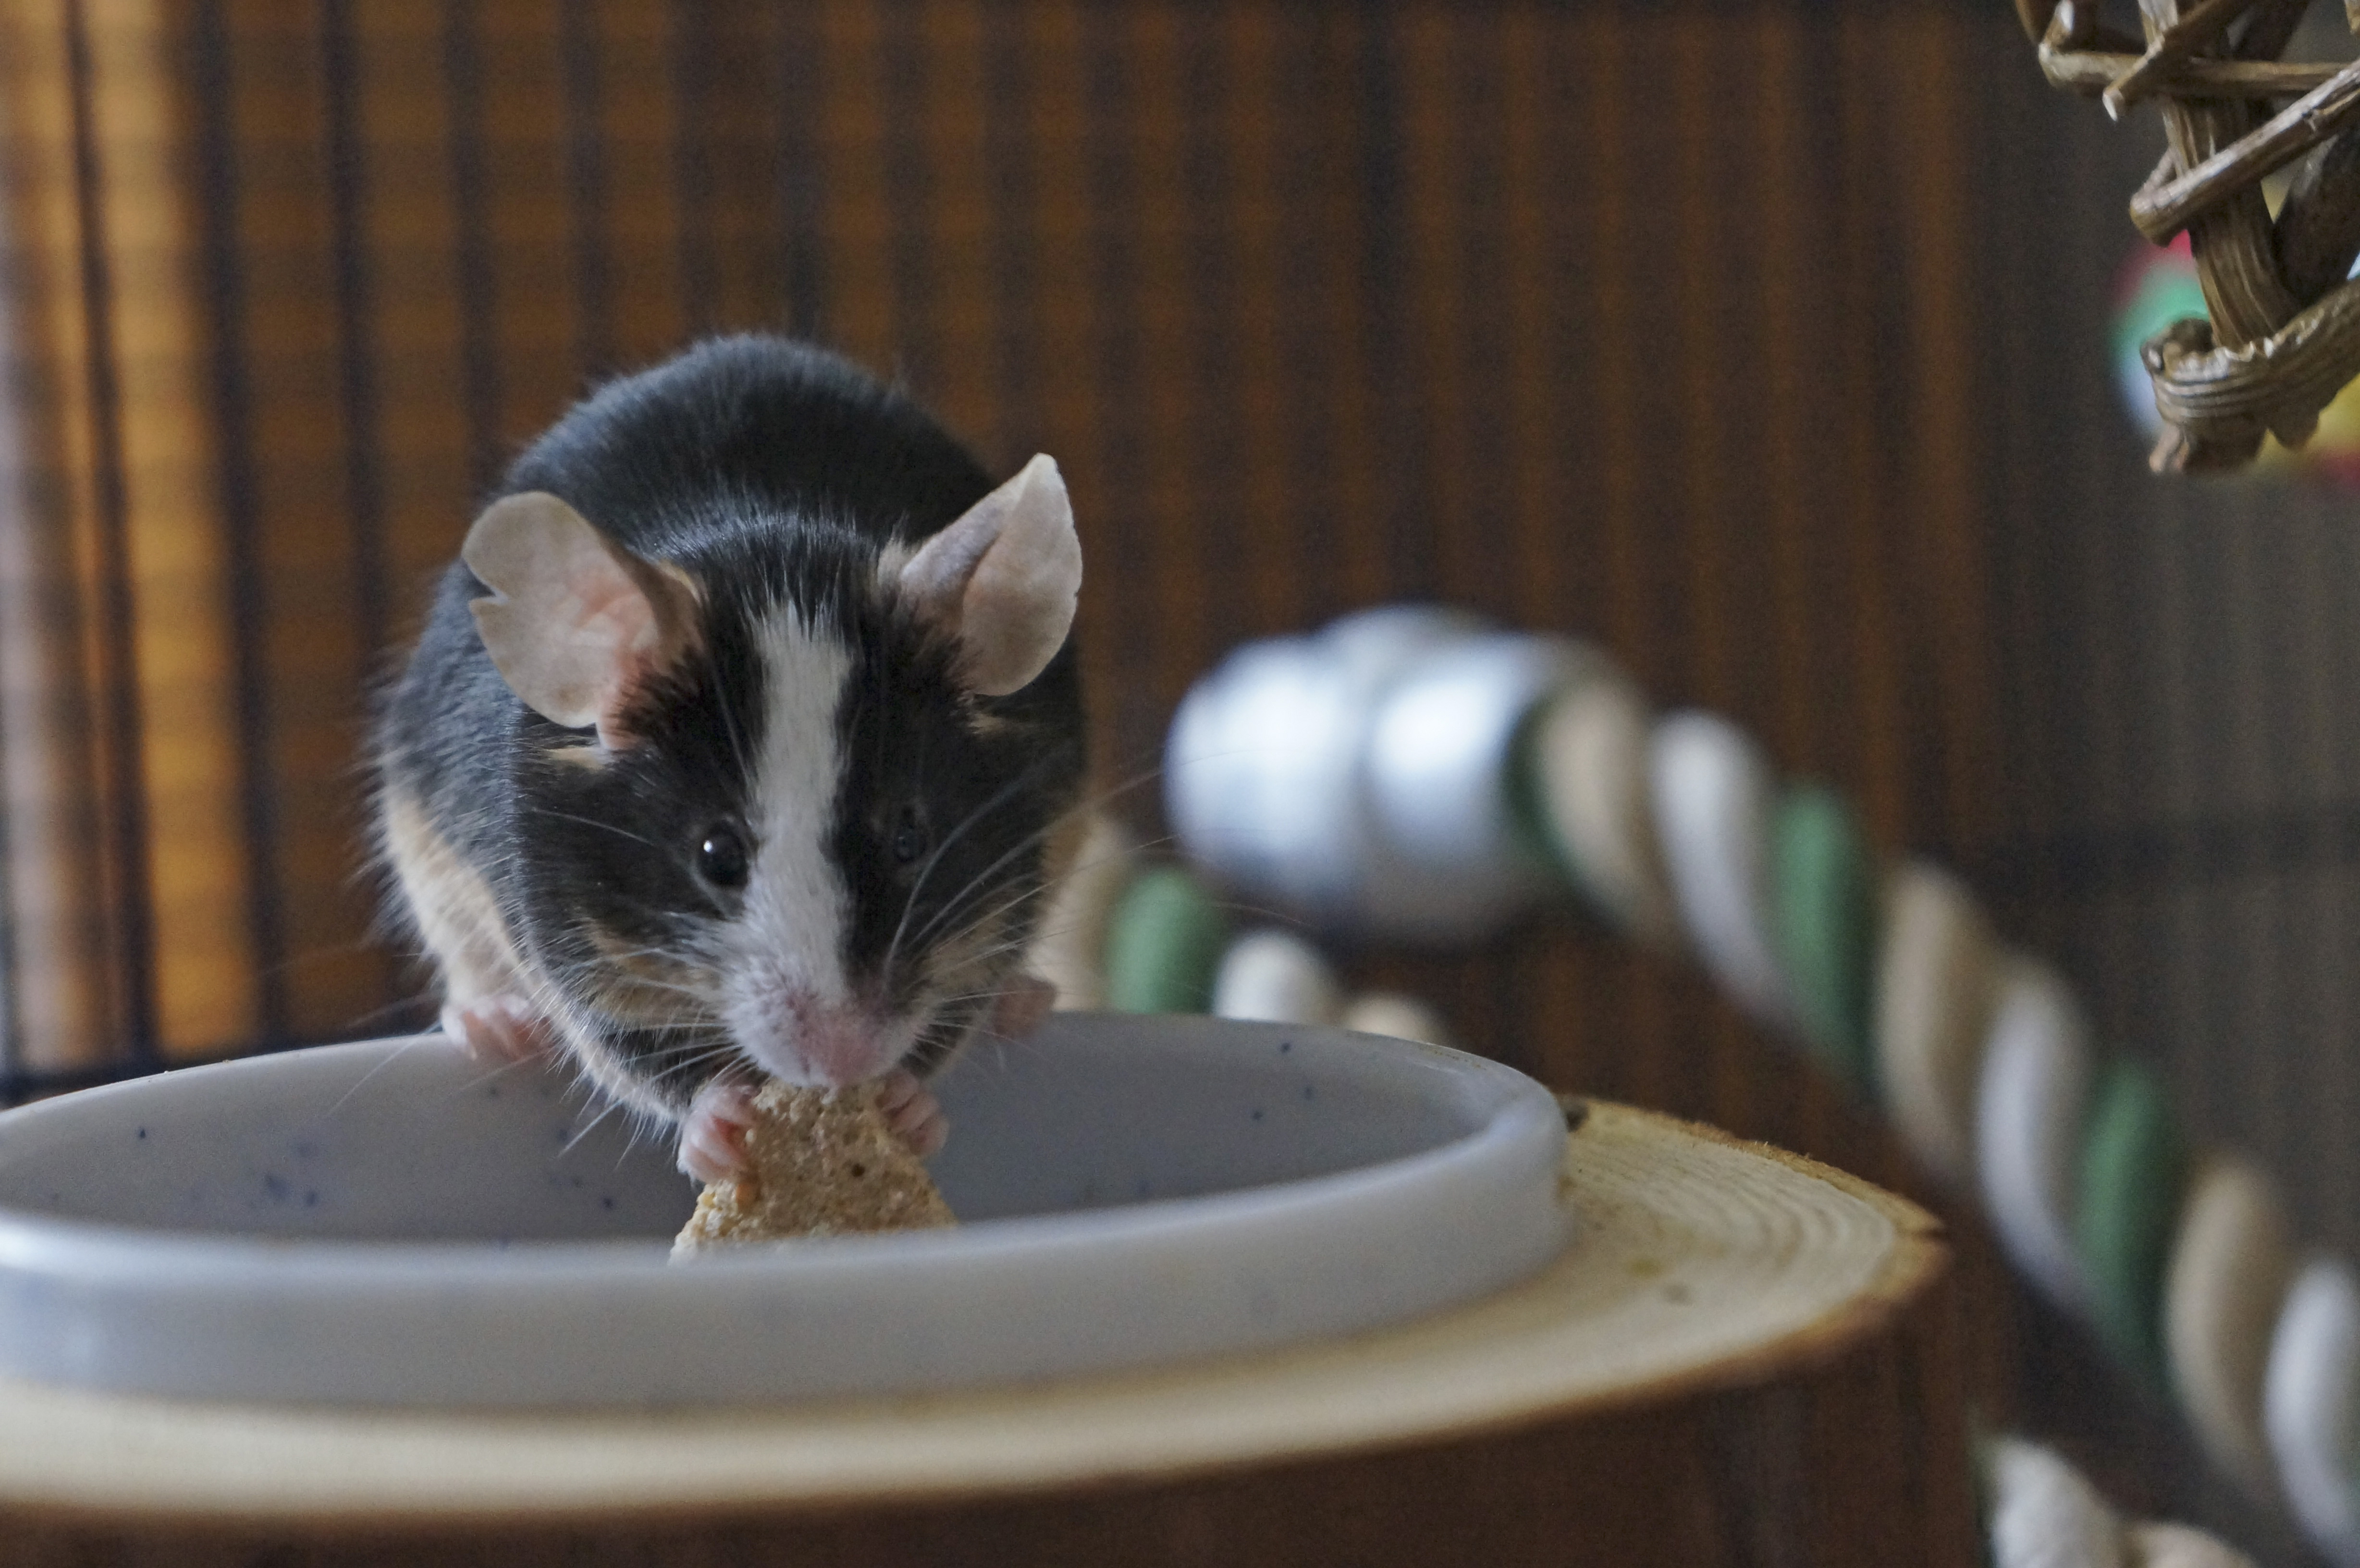 A black and white mouse eats some food from a bowl in their accommodation.